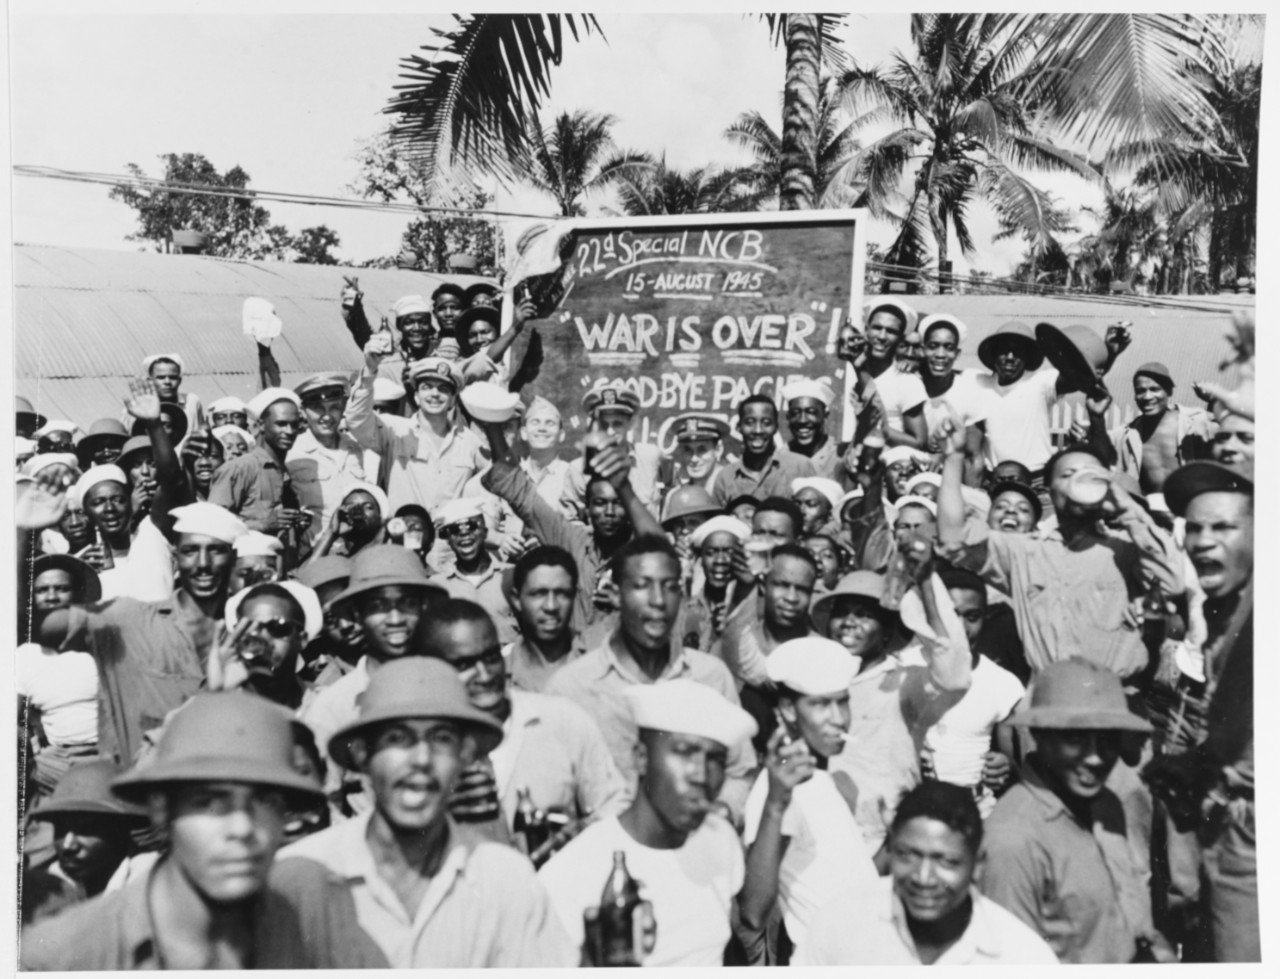 Photo #: 80-G-338470  Peace Celebrations at Naval Amphibious Base, Manus, Admiralty Islands, 15 August 1945